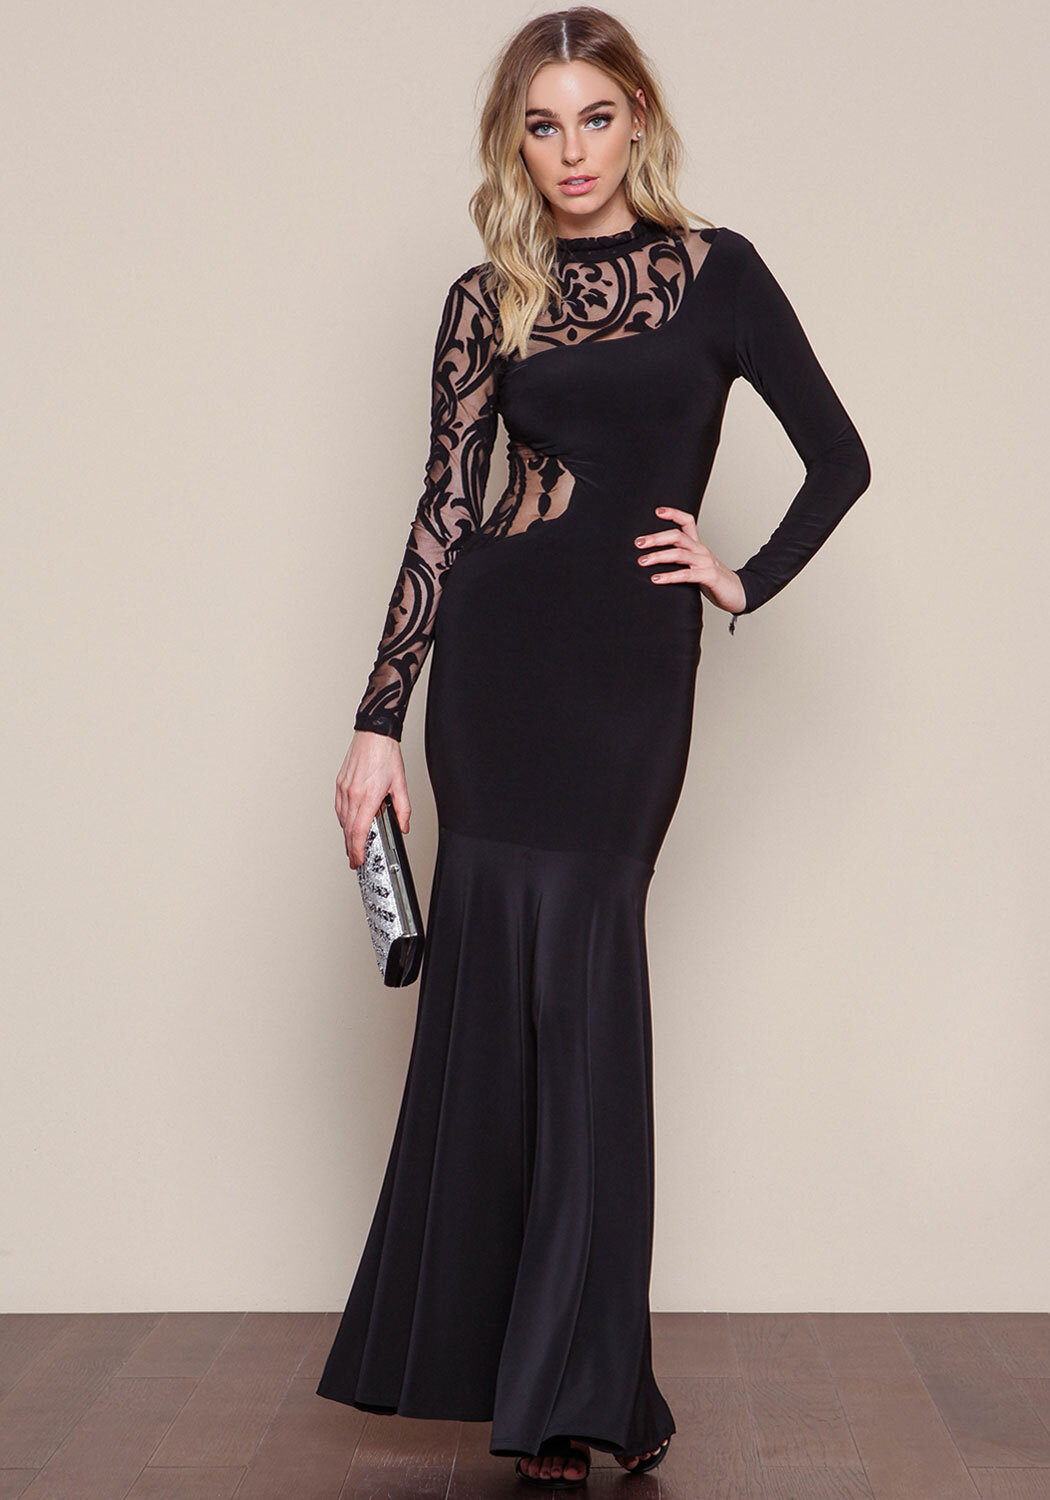 Junior Clothing | Black Long Sleeve Lace Gown | Loveculture.com